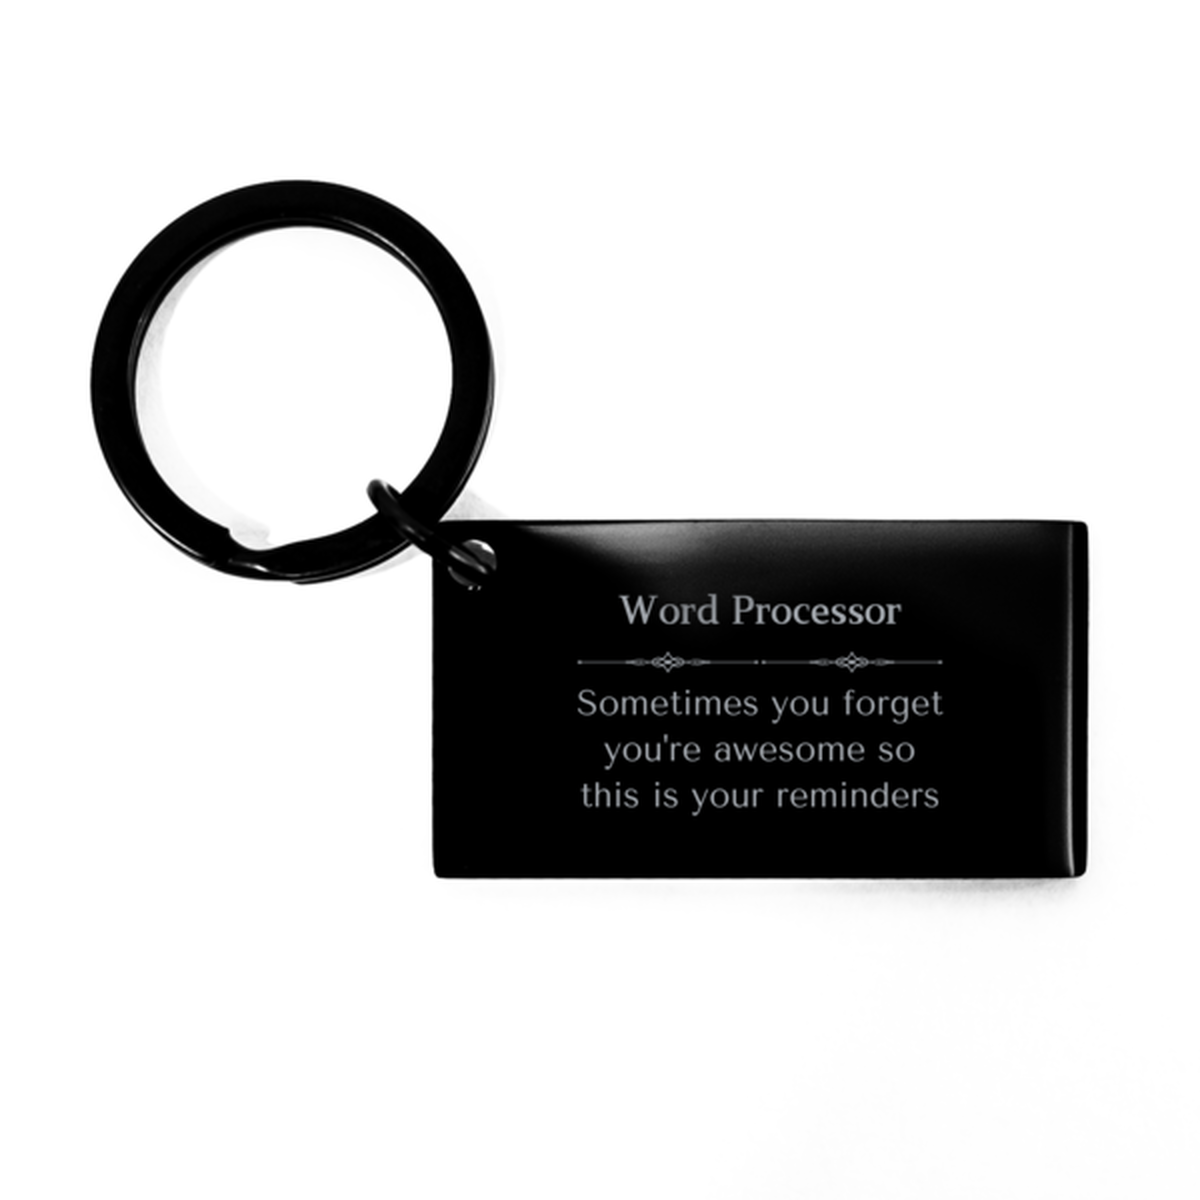 Sentimental Word Processor Keychain, Attendant Sometimes you forget you're awesome so this is your reminders, Graduation Christmas Birthday Gifts for Word Processor, Men, Women, Coworkers